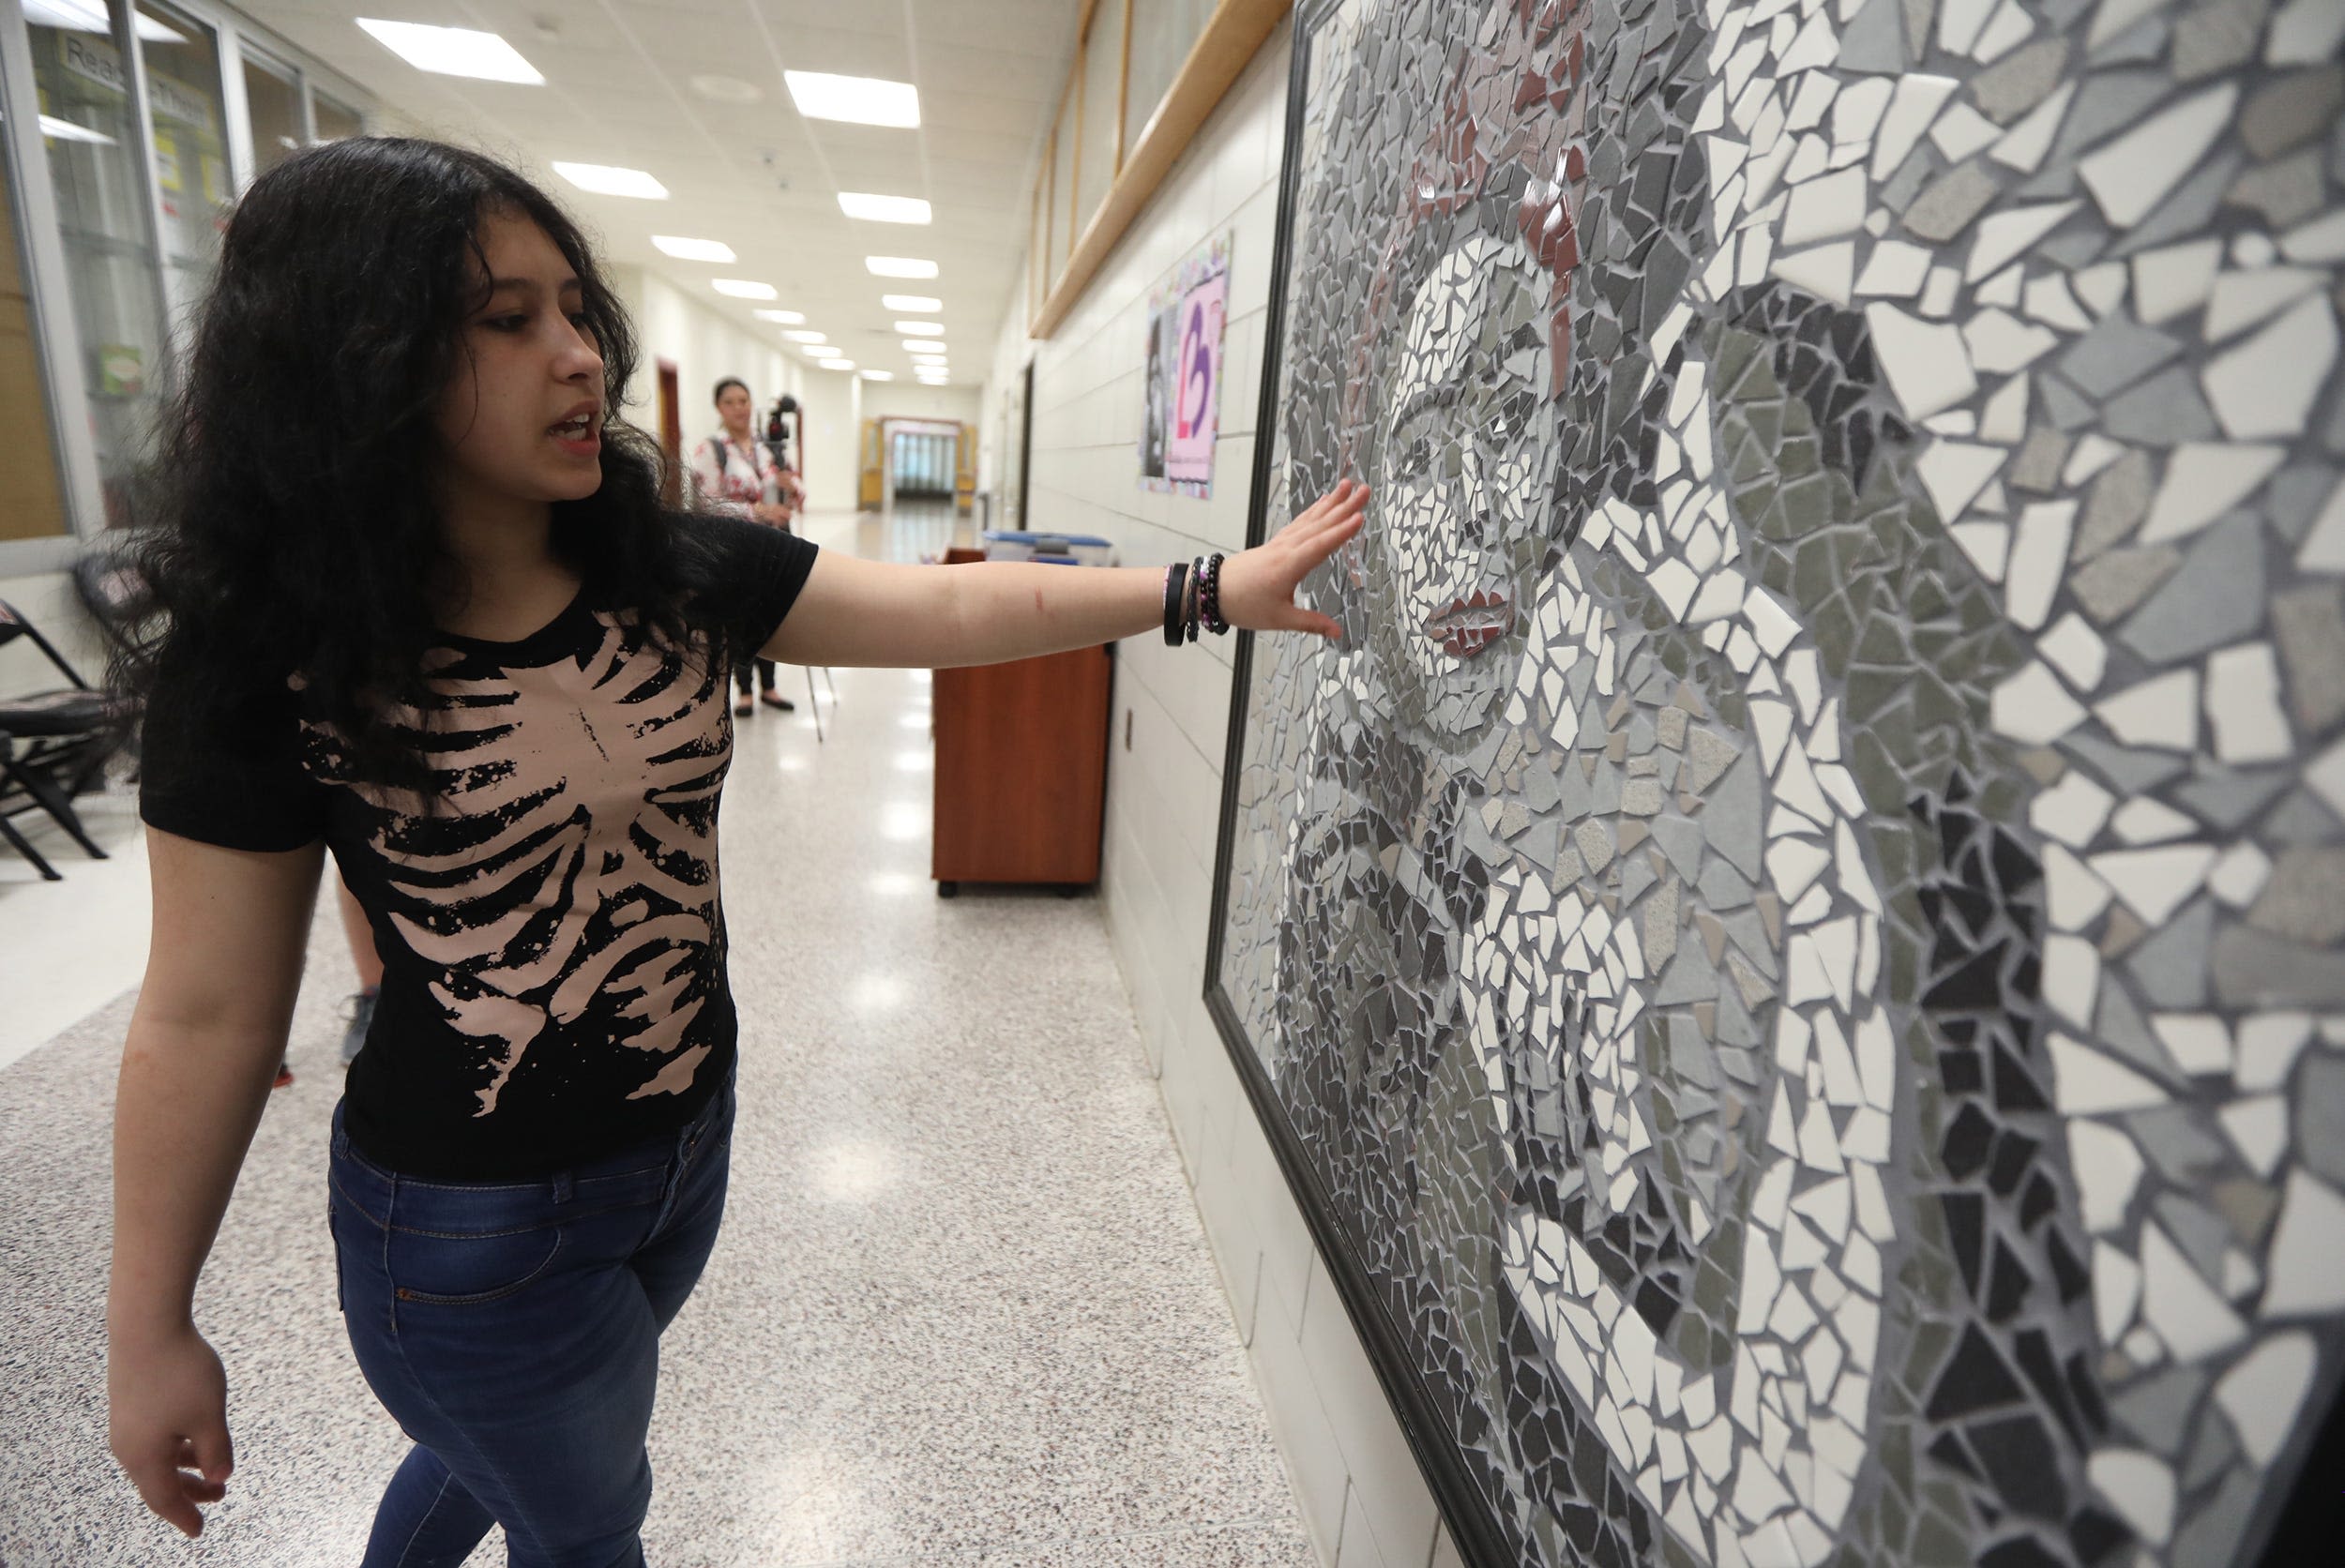 Edison Career and Technology students unveil mosaic mural in honor of 'Black Rosies'